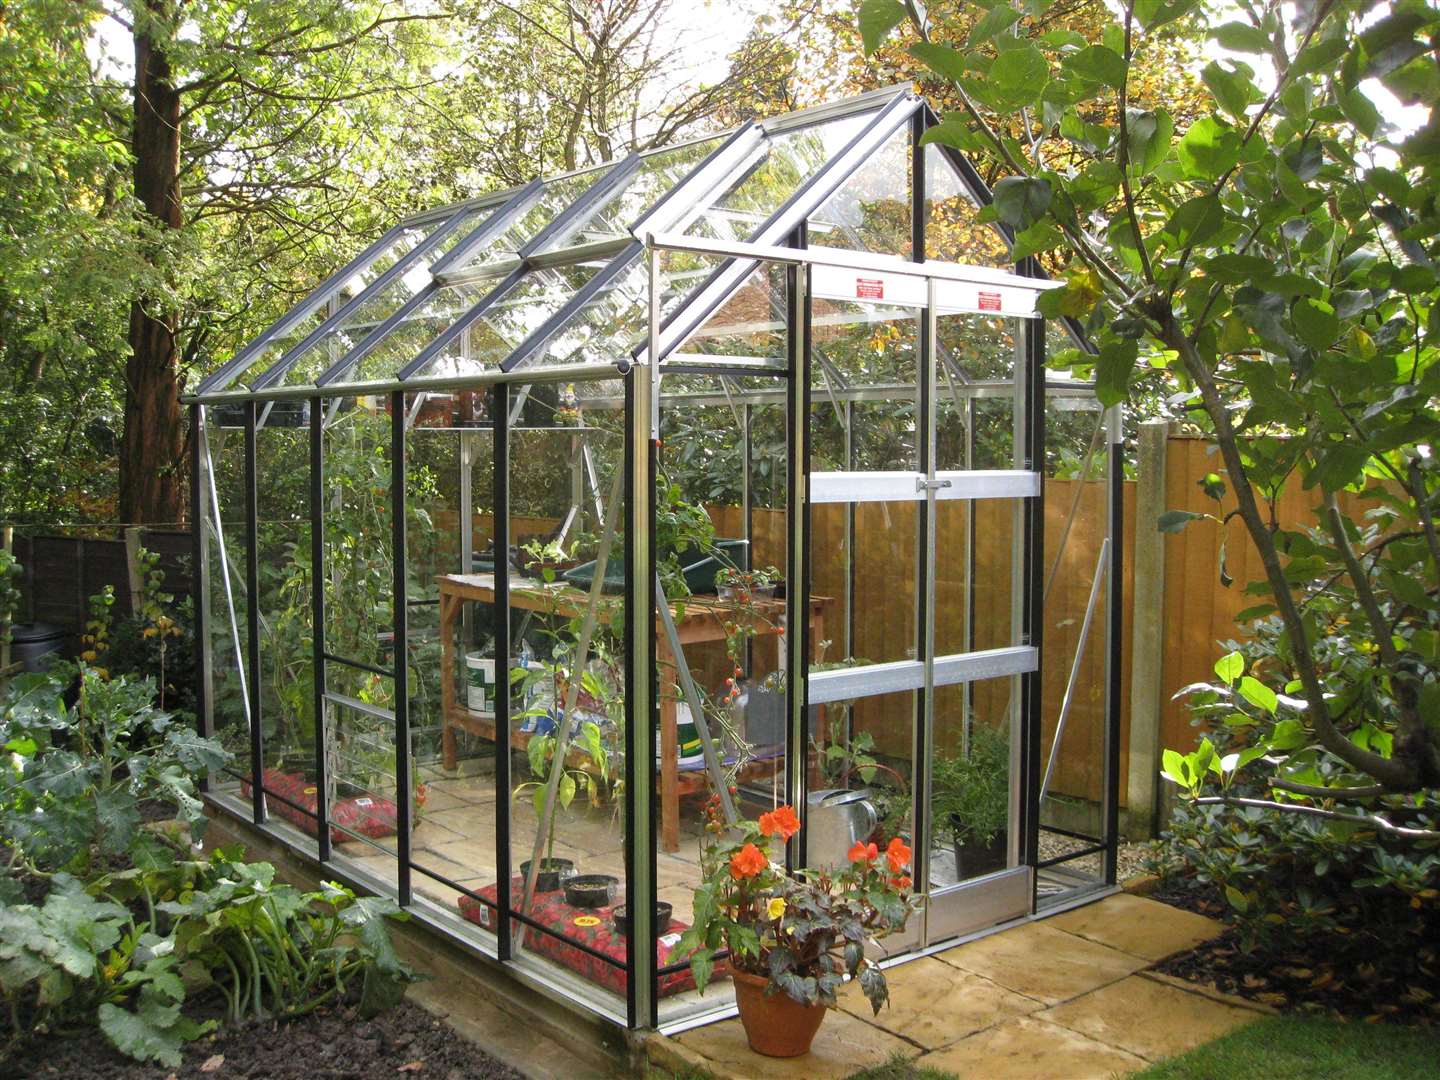 Greenhouses and sheds can be dangerous heat-traps for your pet in hot weather.